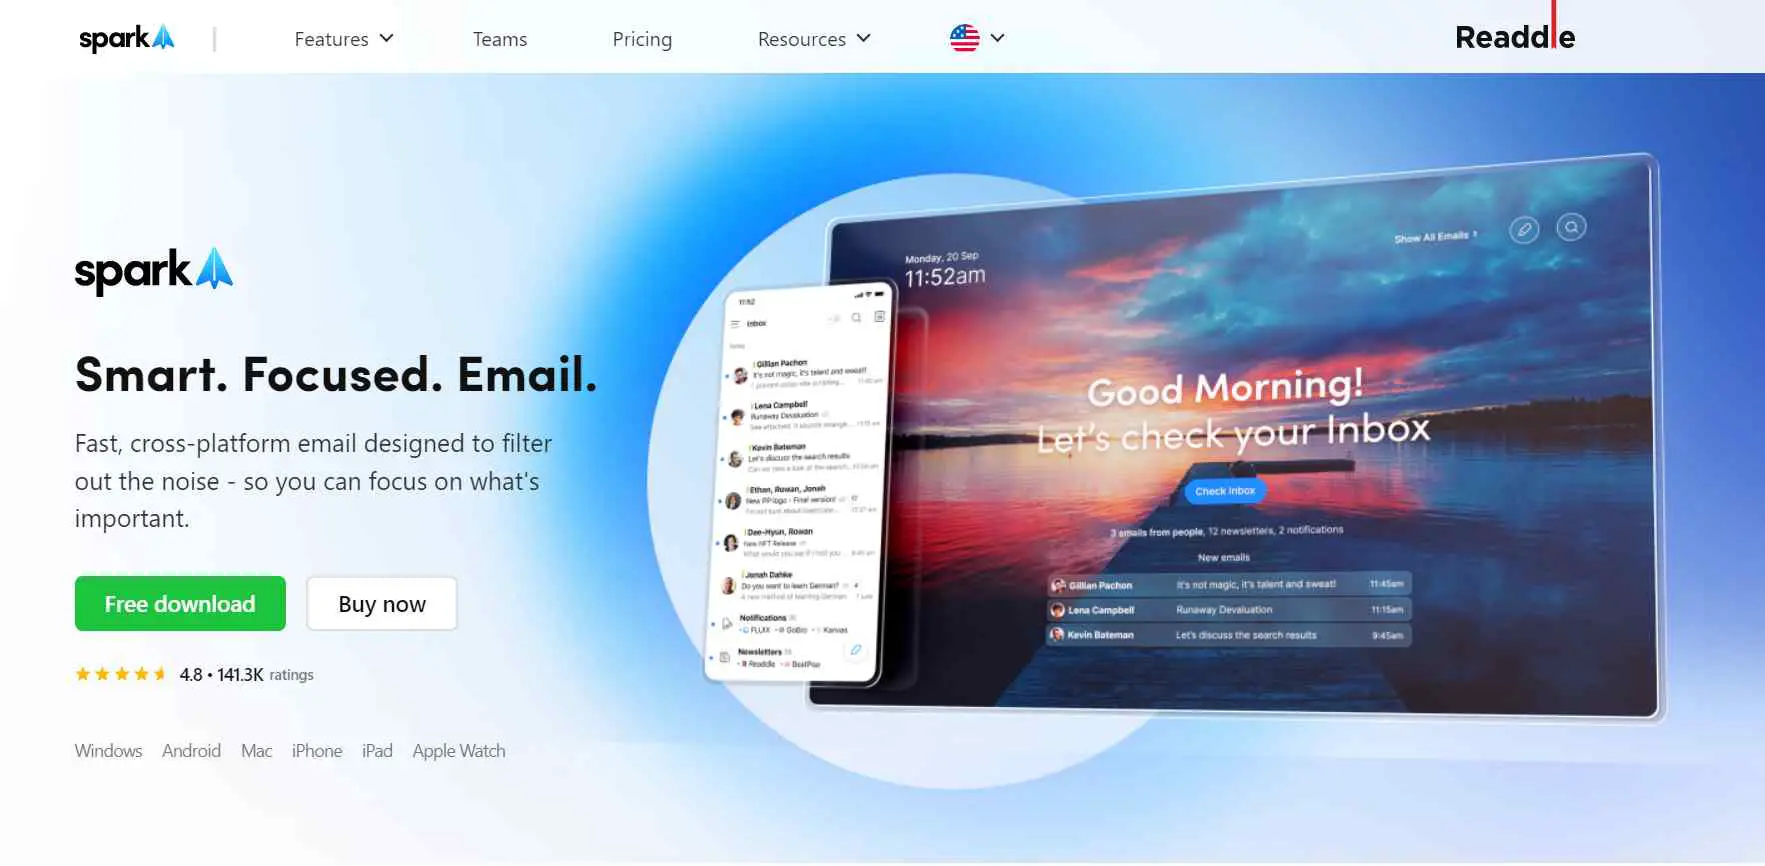 The Spark email client is a powerful and easy-to-use platform that helps you quickly organize your emails and find what you need.